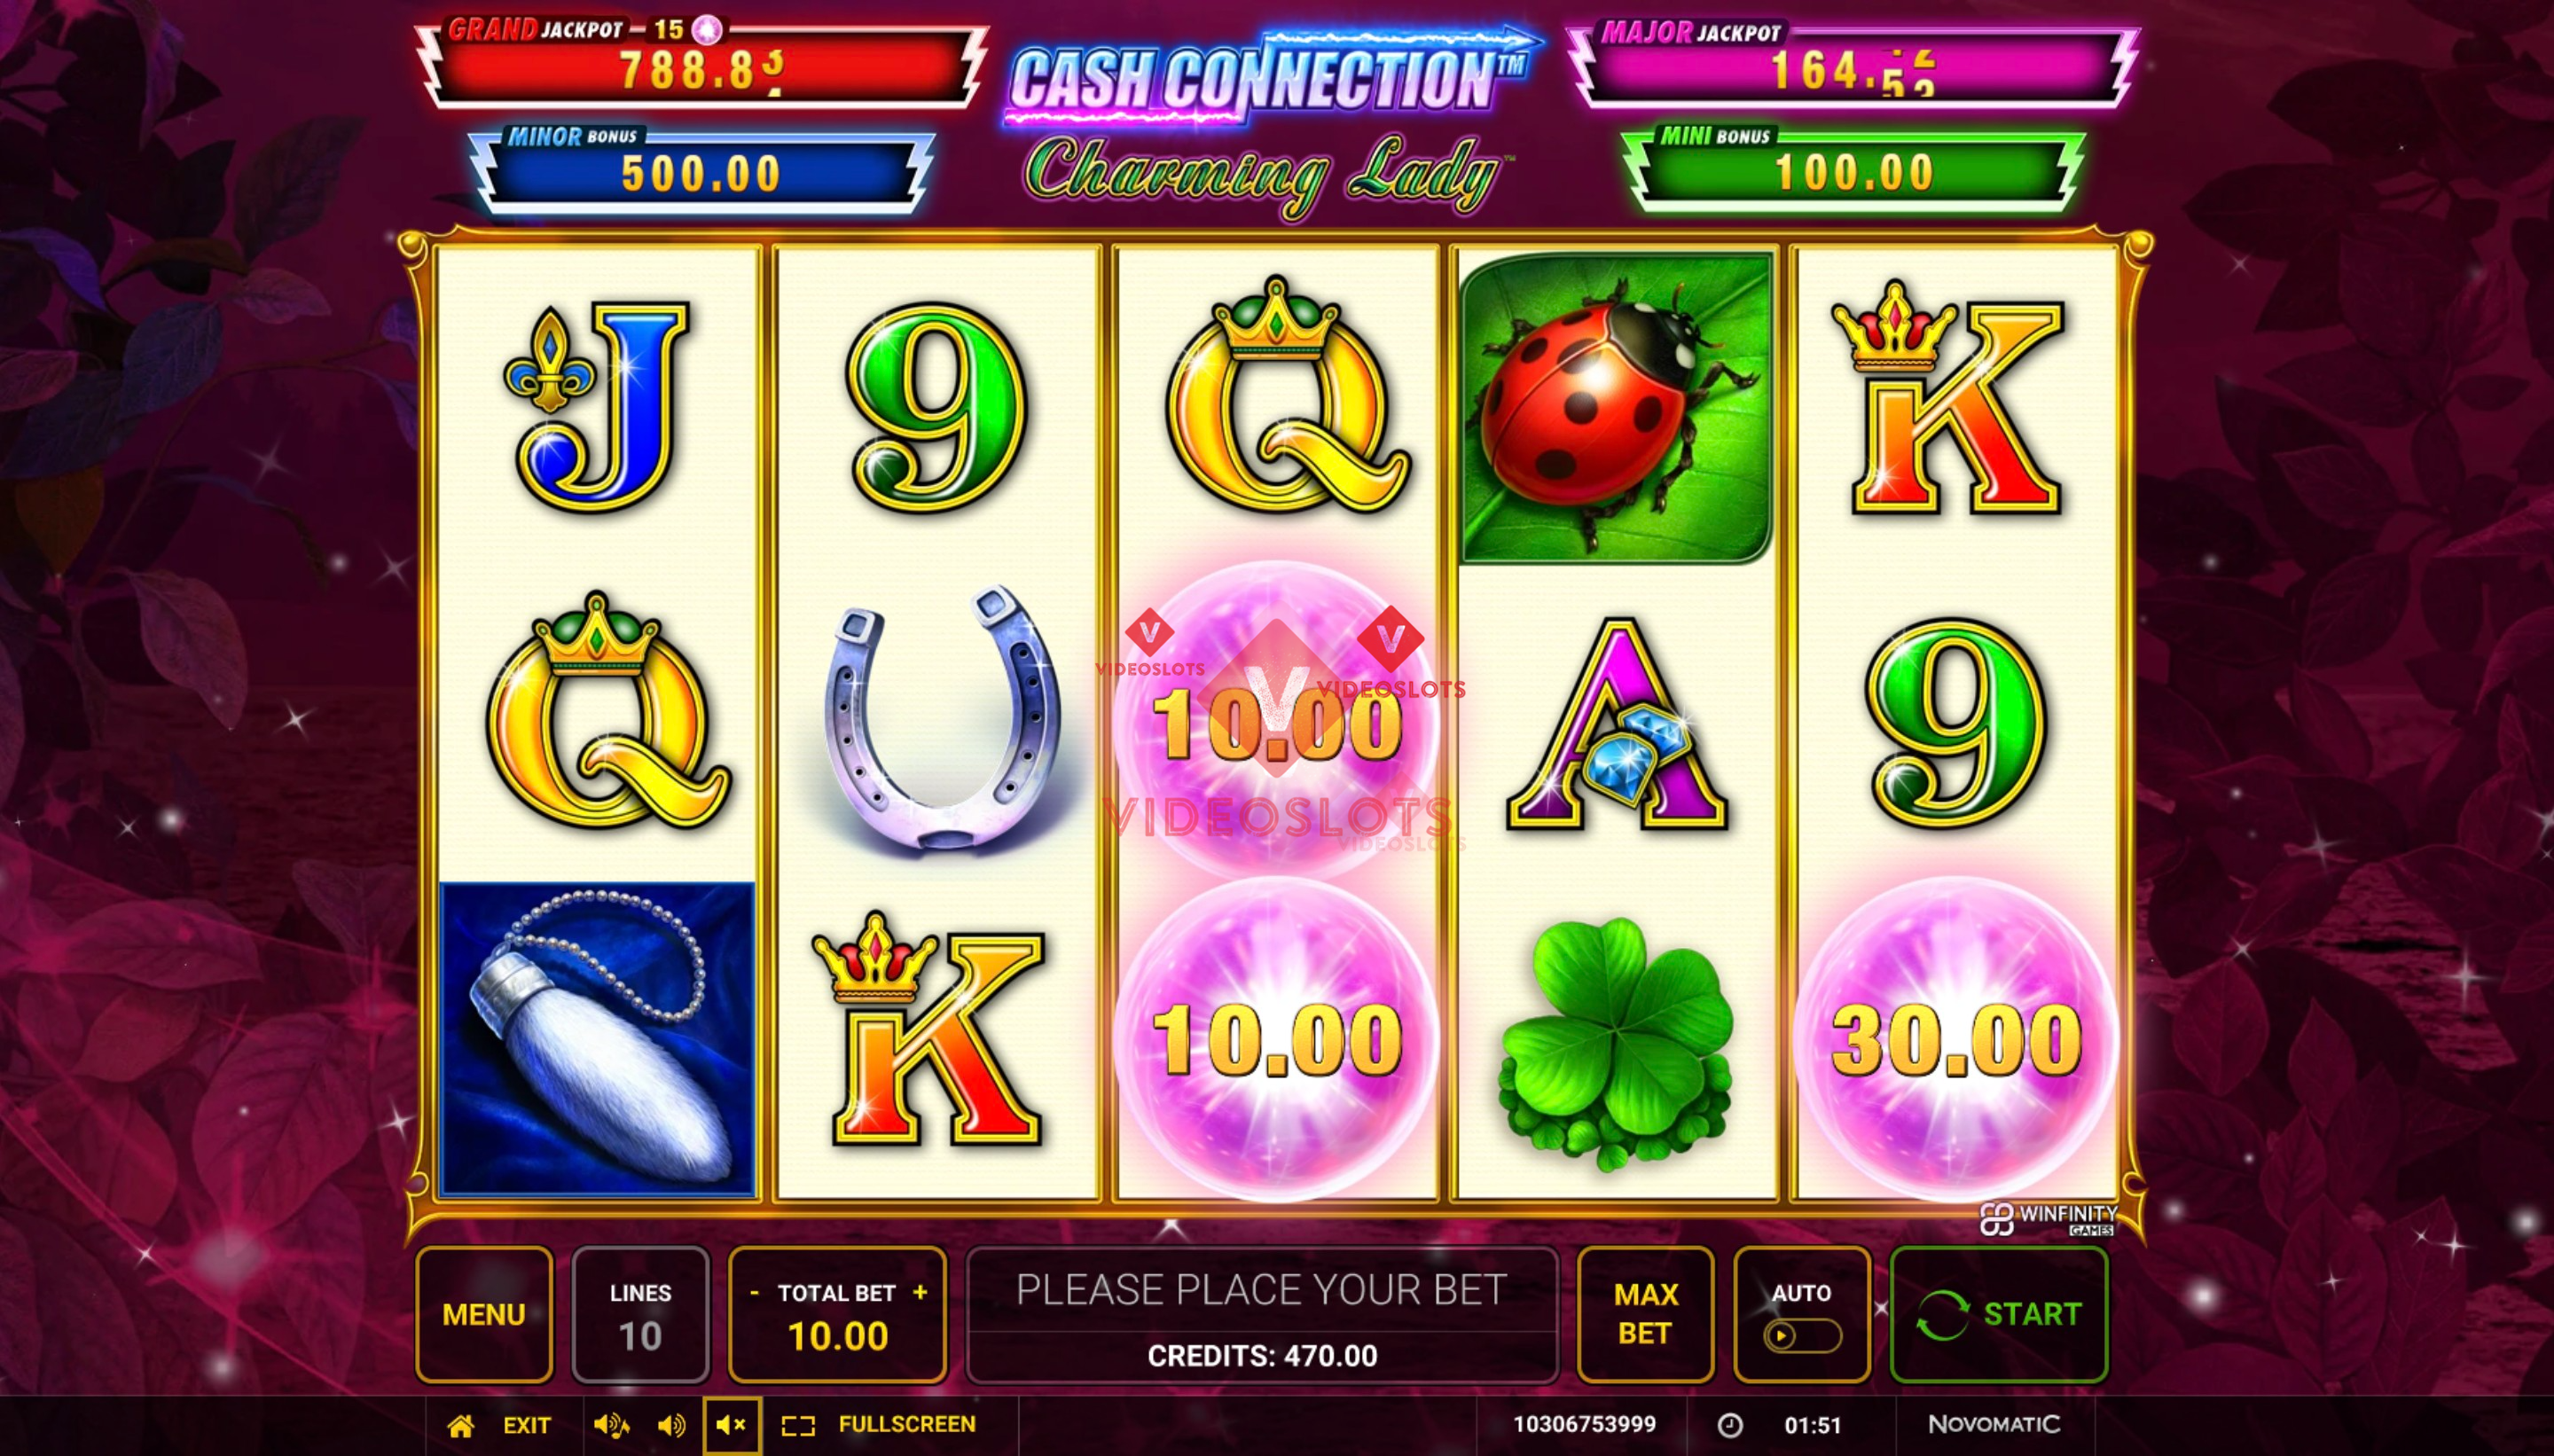 Base Game for Cash Connection Charming Lady slot from Greentube